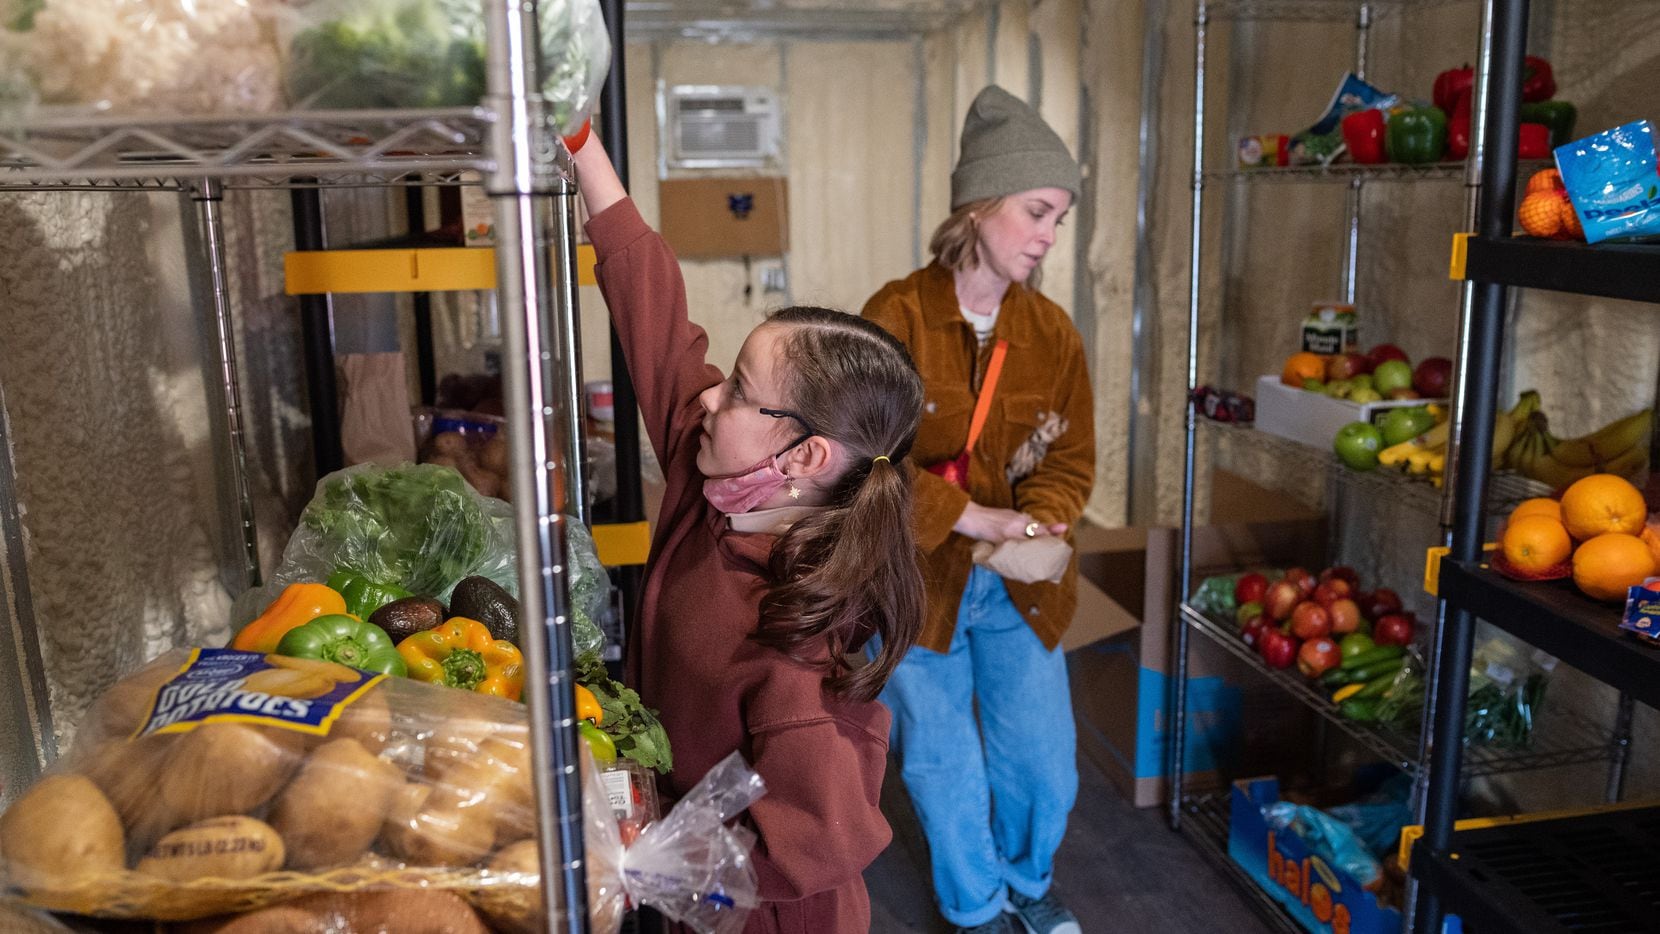 Finley Miles, 8, left, and her mother Hilary Miles, stock shelves with fruits and veggies...